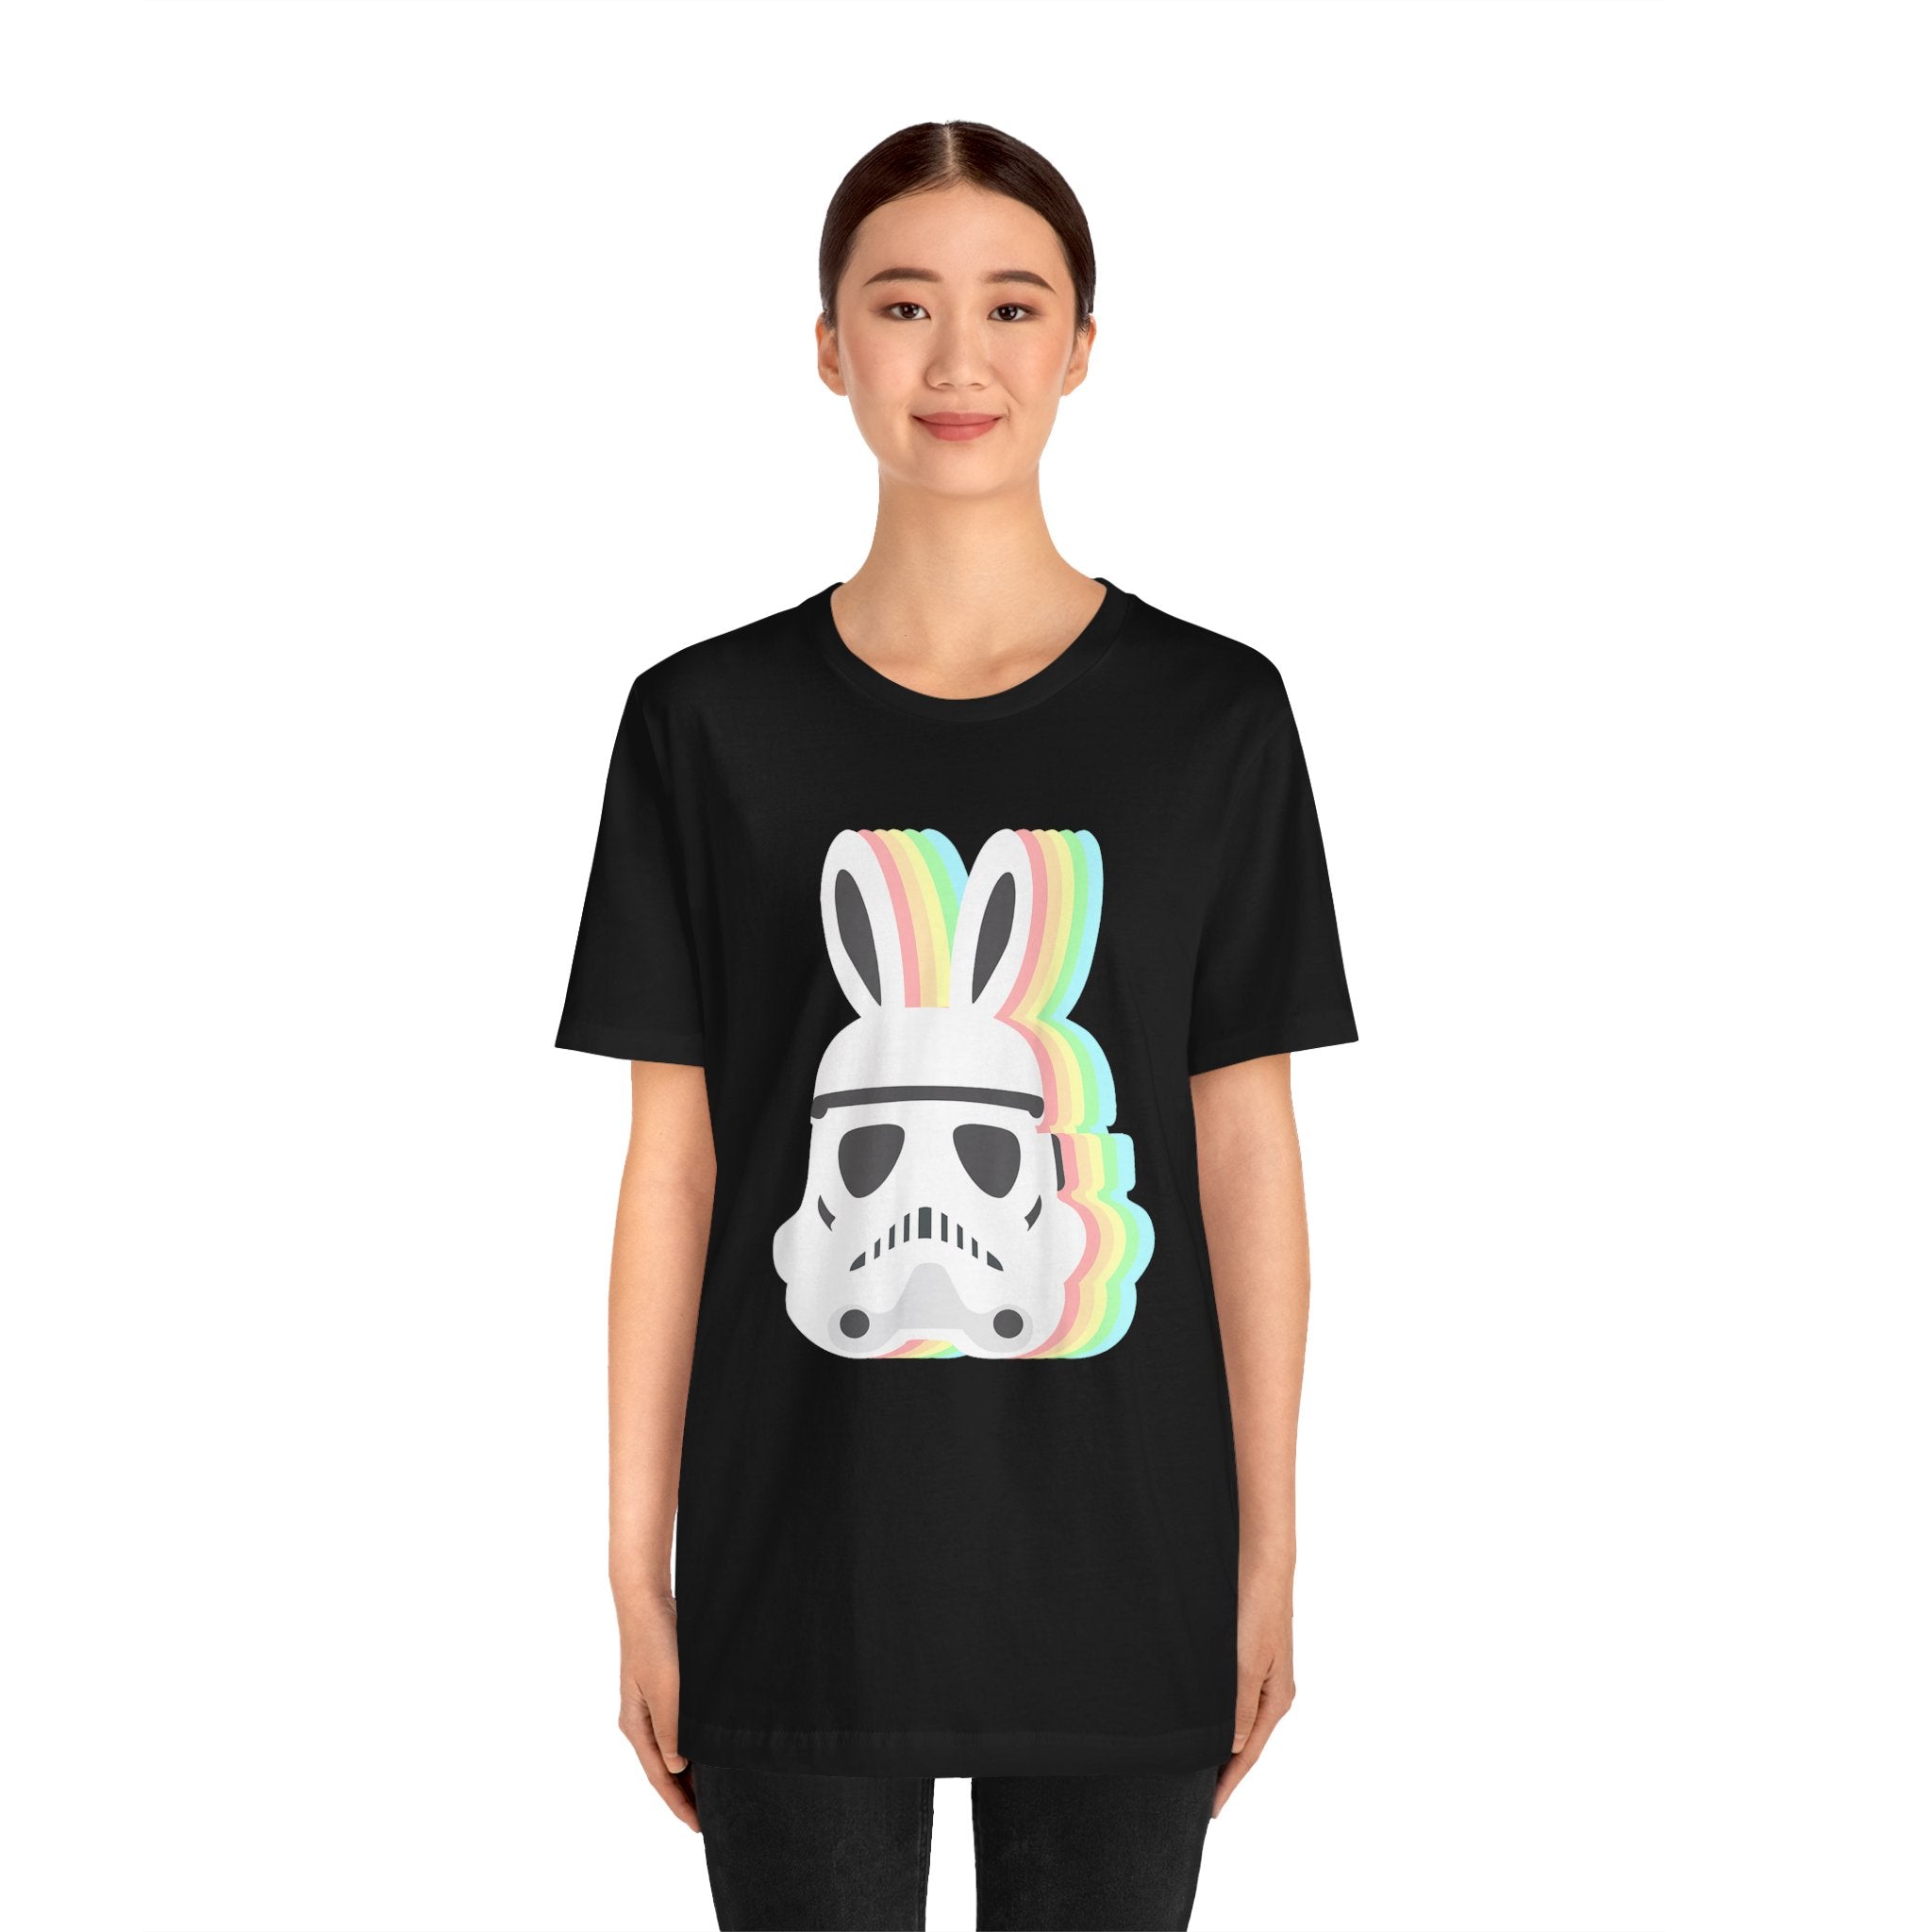 A young woman wearing a black tee featuring the Easter Stormtrooper Bunny design that combines a stormtrooper helmet with colorful bunny ears.